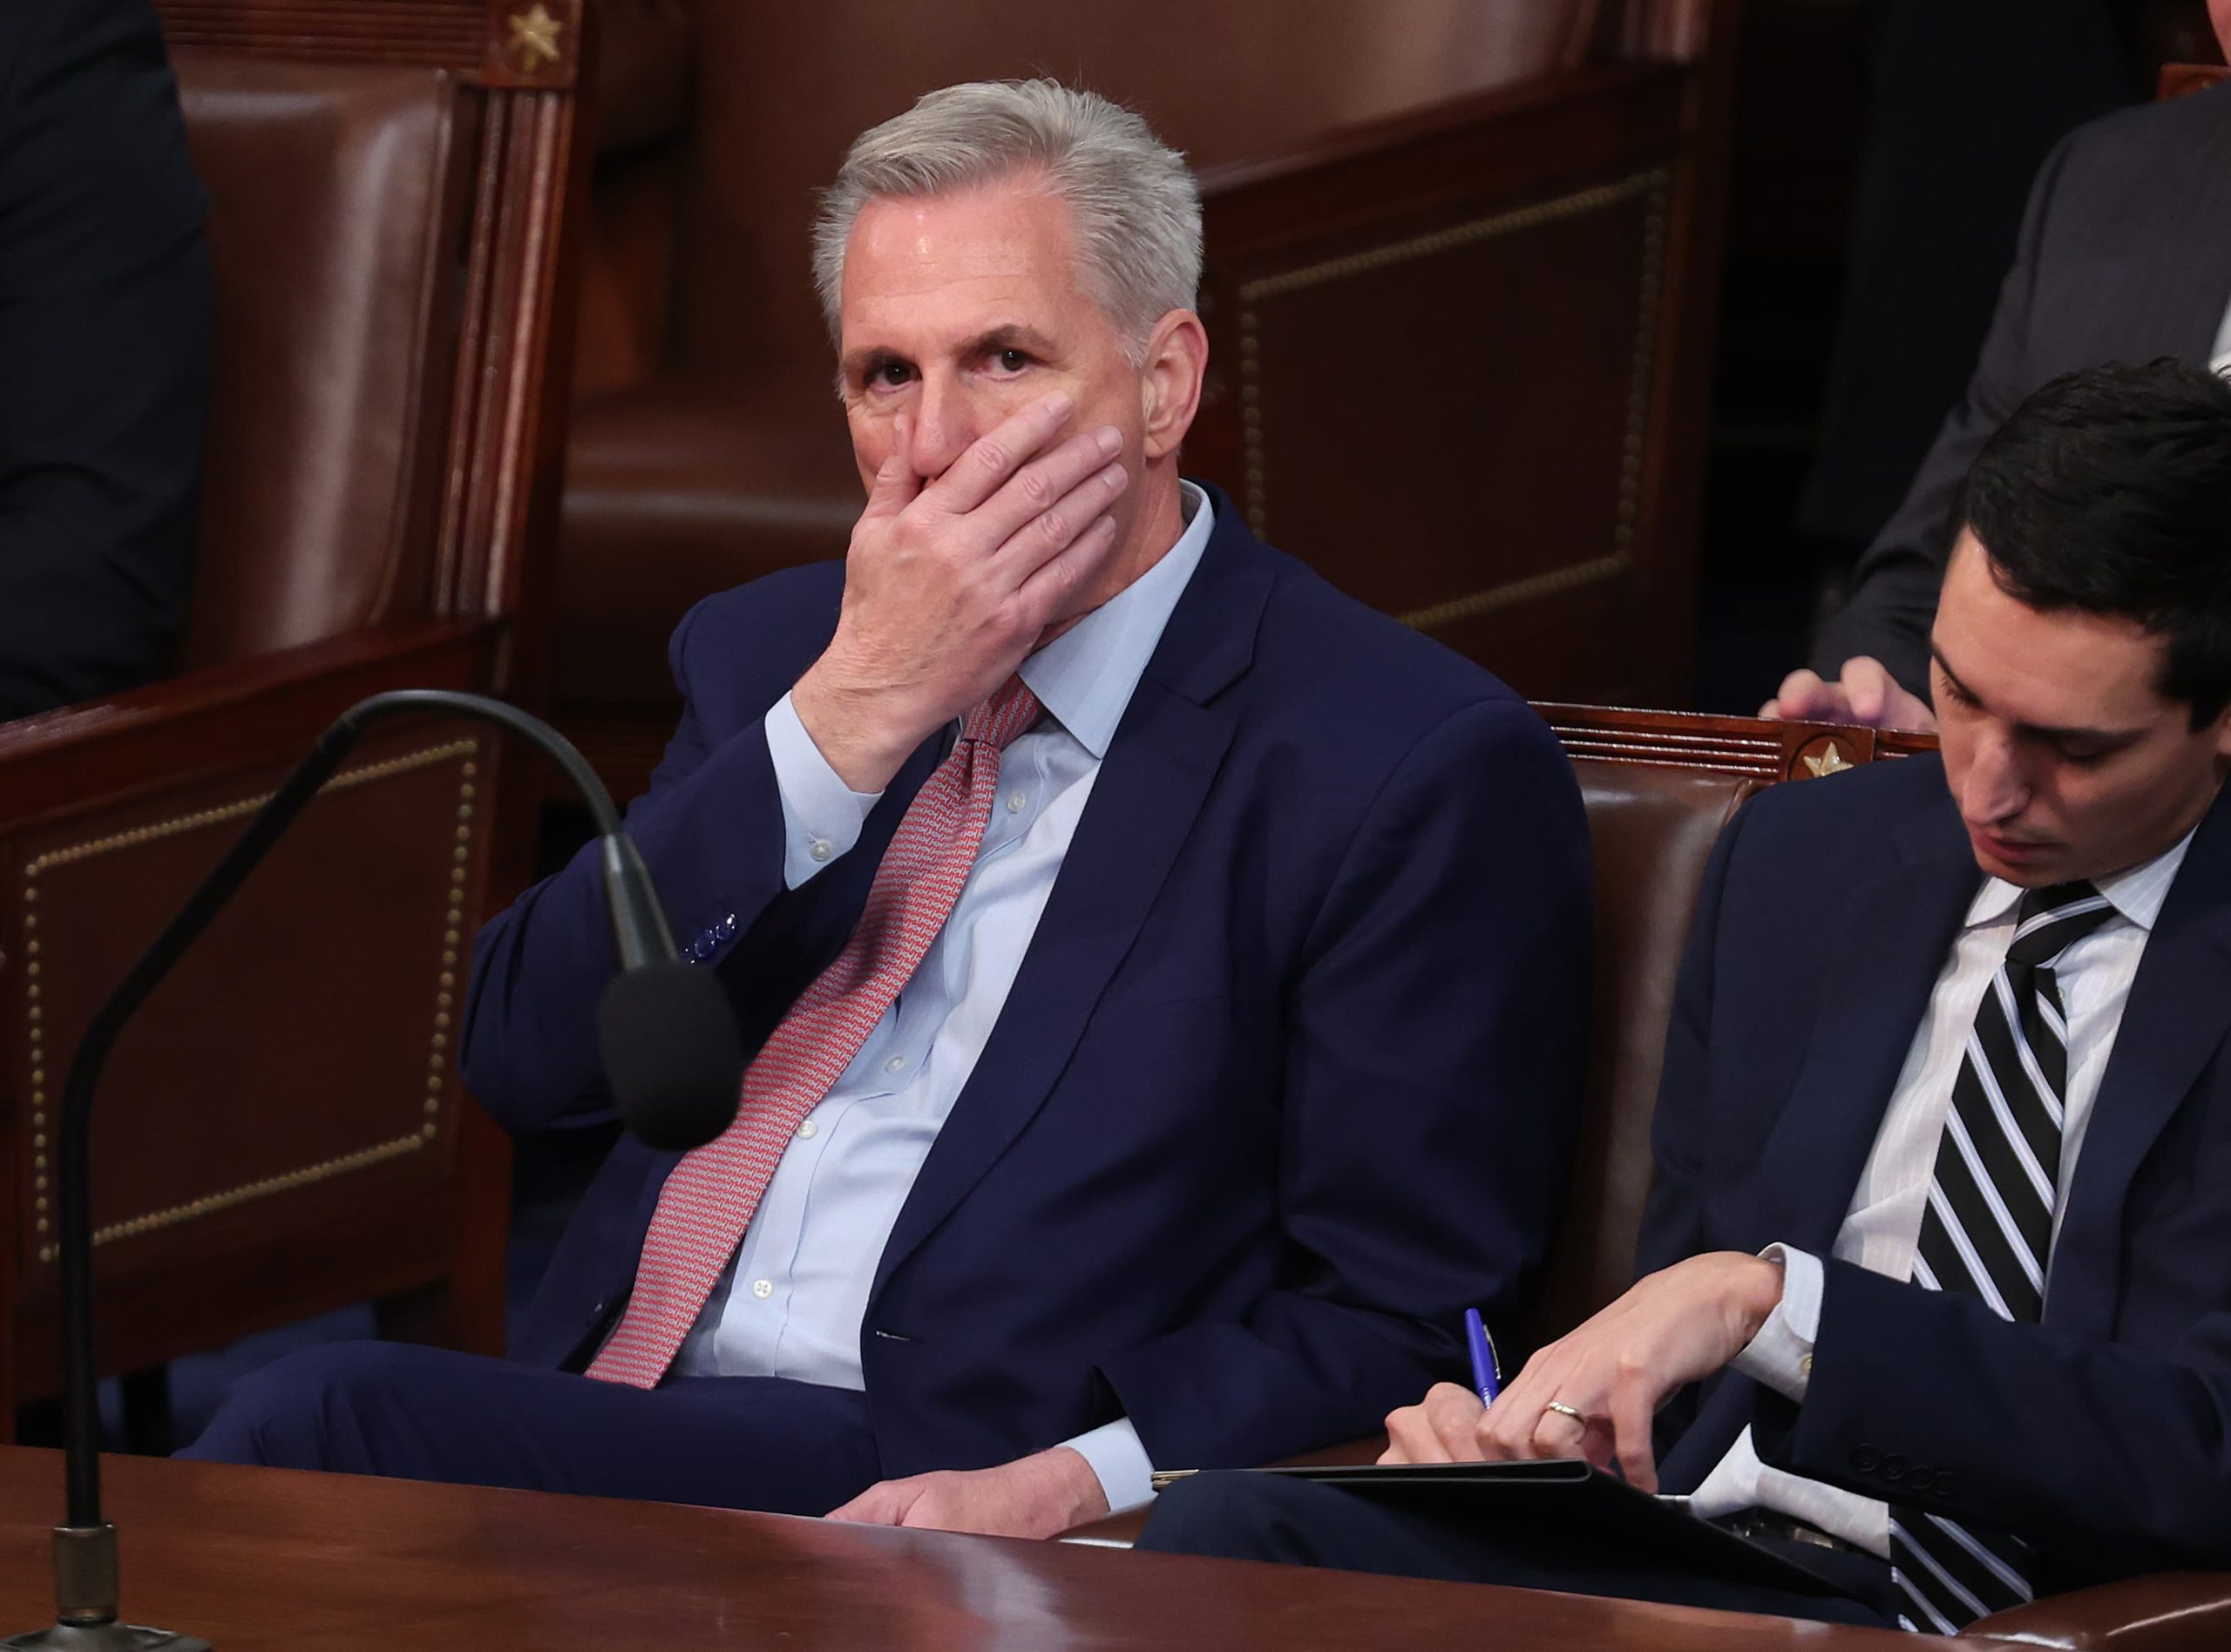 McCarthy loses the vote for speaker in a marathon session